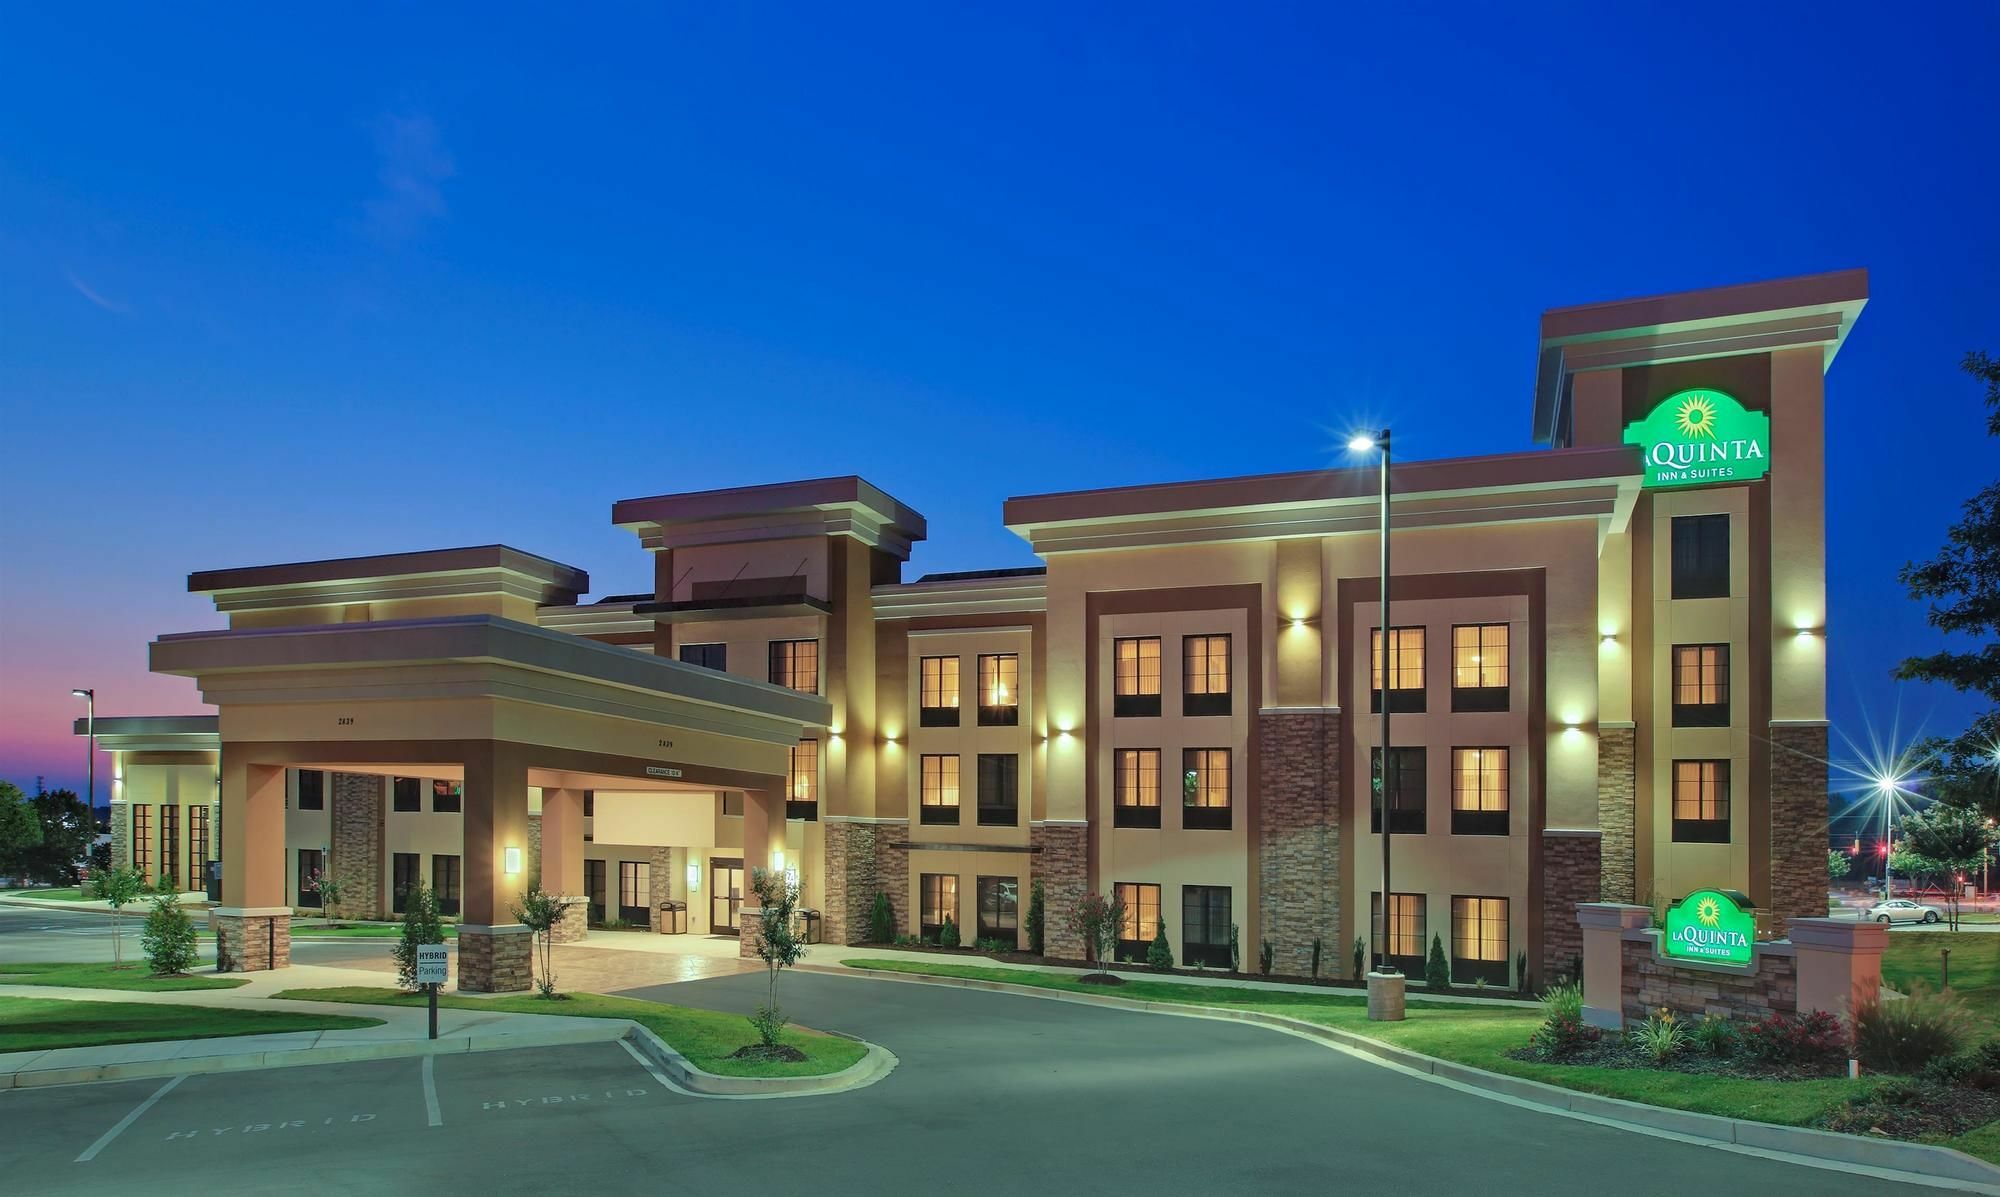 La Quinta By Wyndham Memphis Wolfchase Hotel Exterior photo